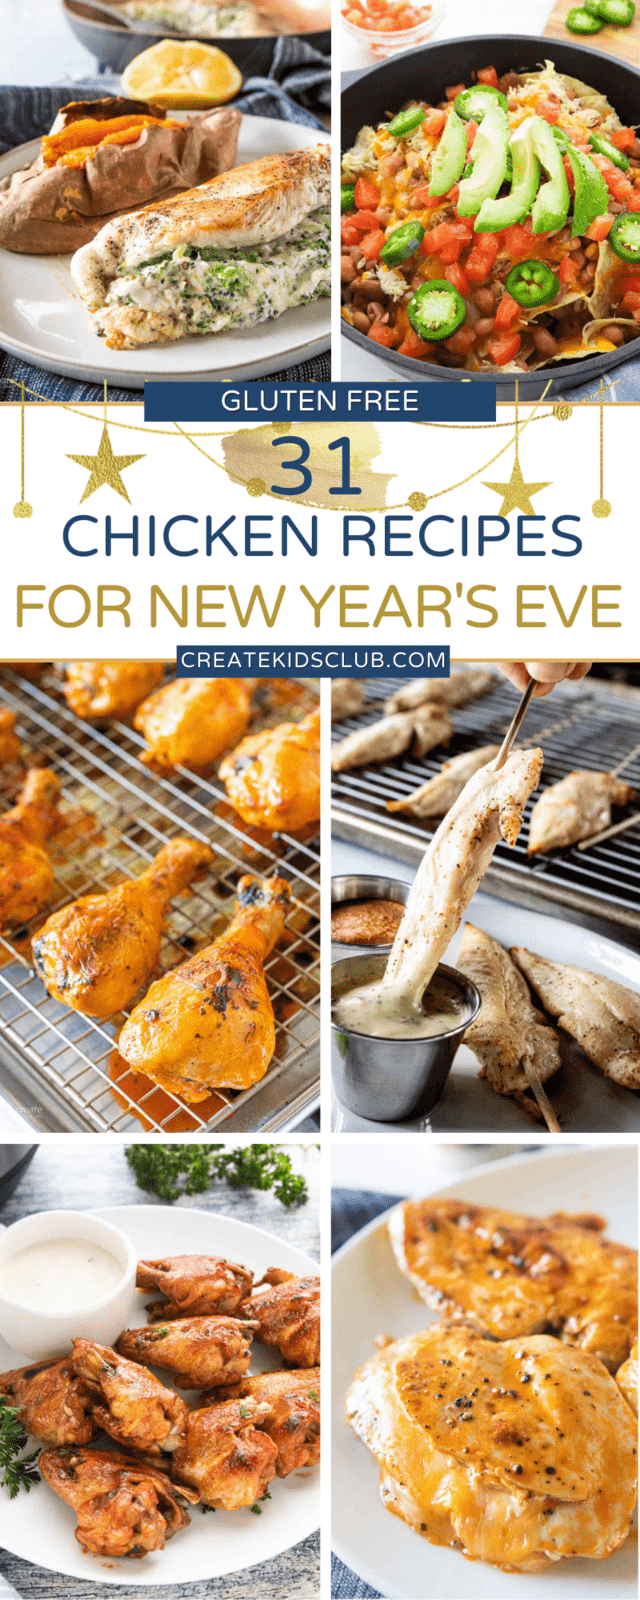 31 Chicken Recipes for New Years Eve